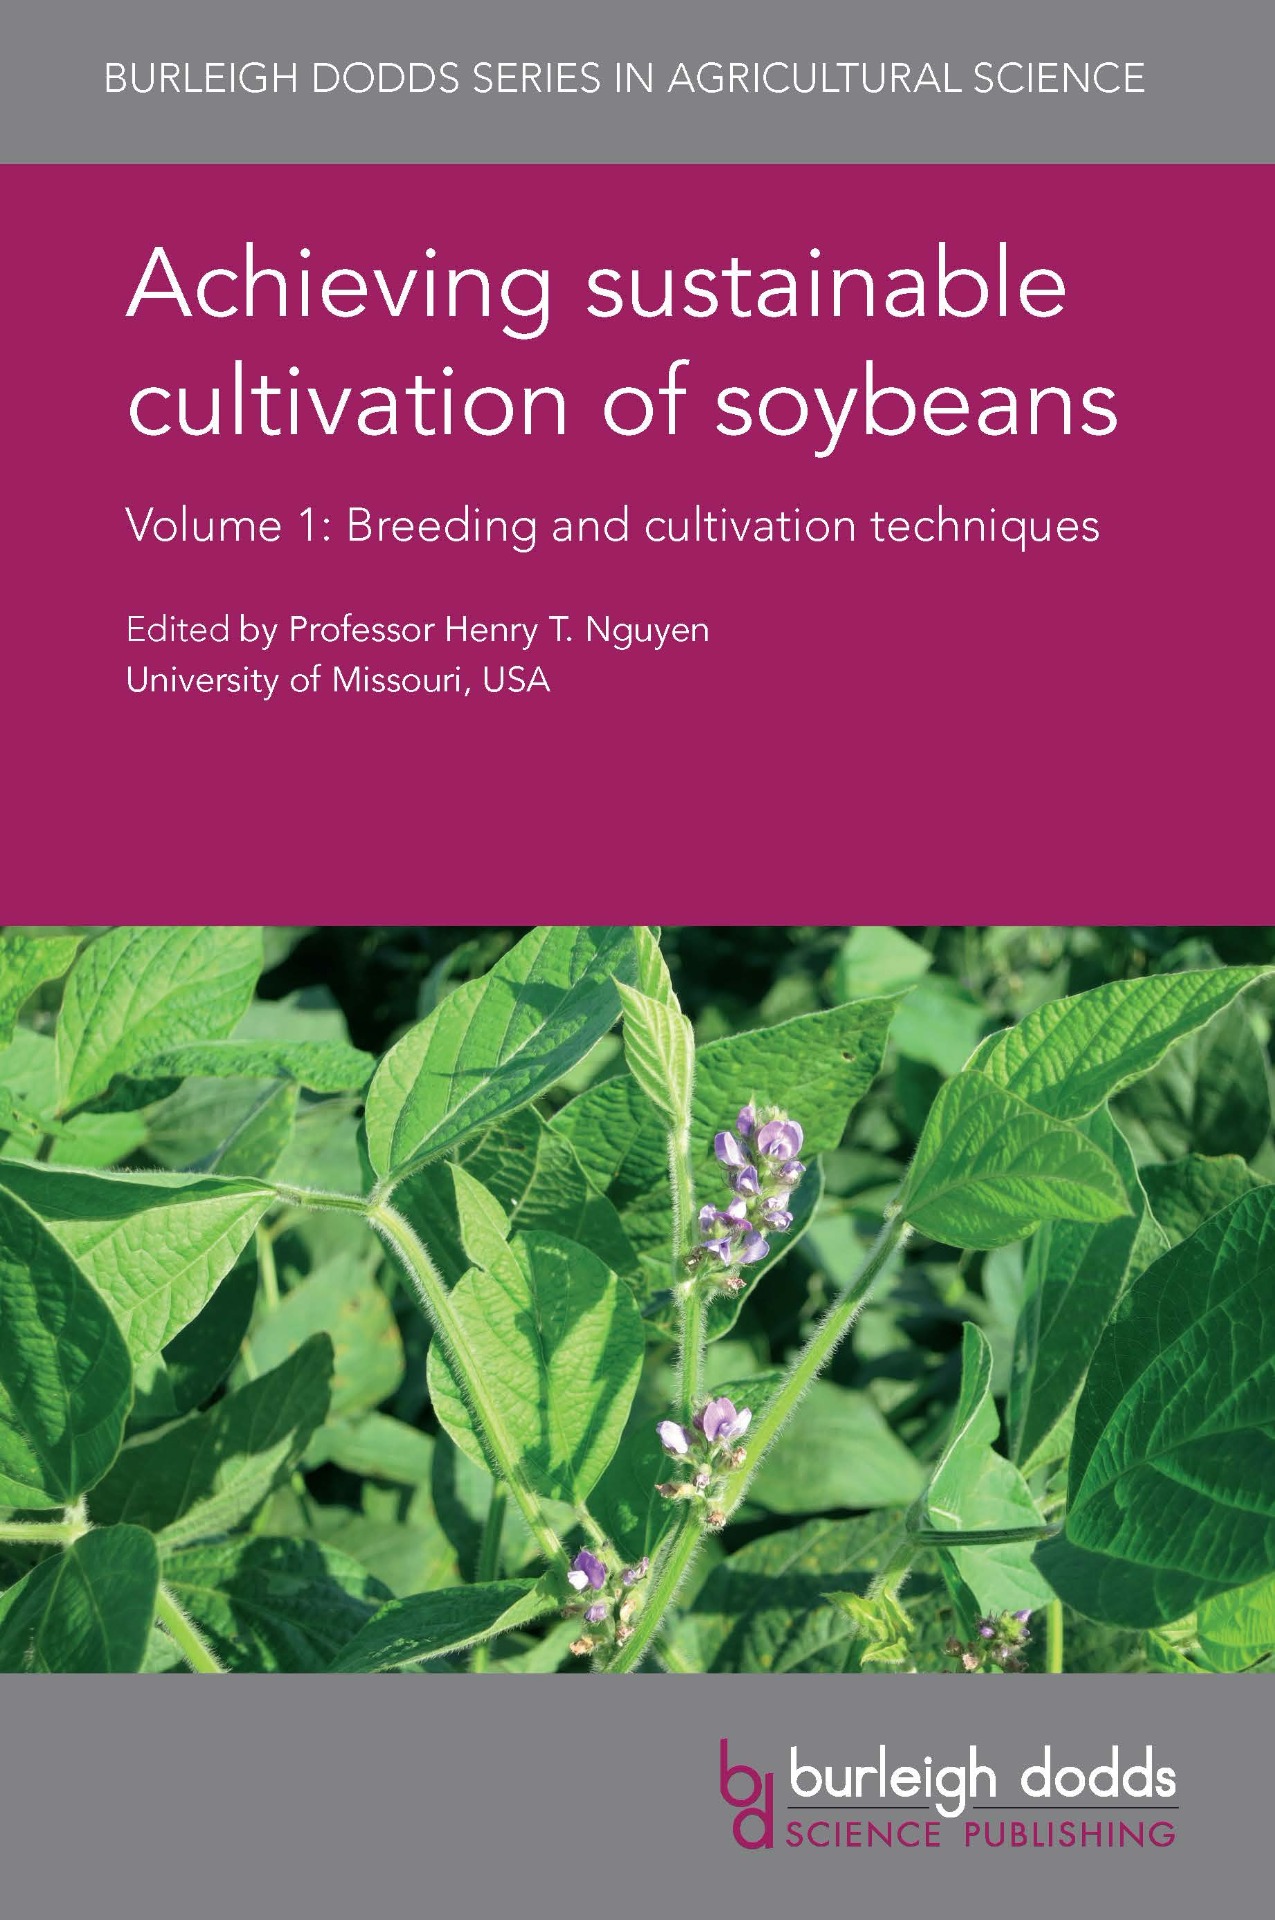 Achieving sustainable cultivation of soybeans Volume 1